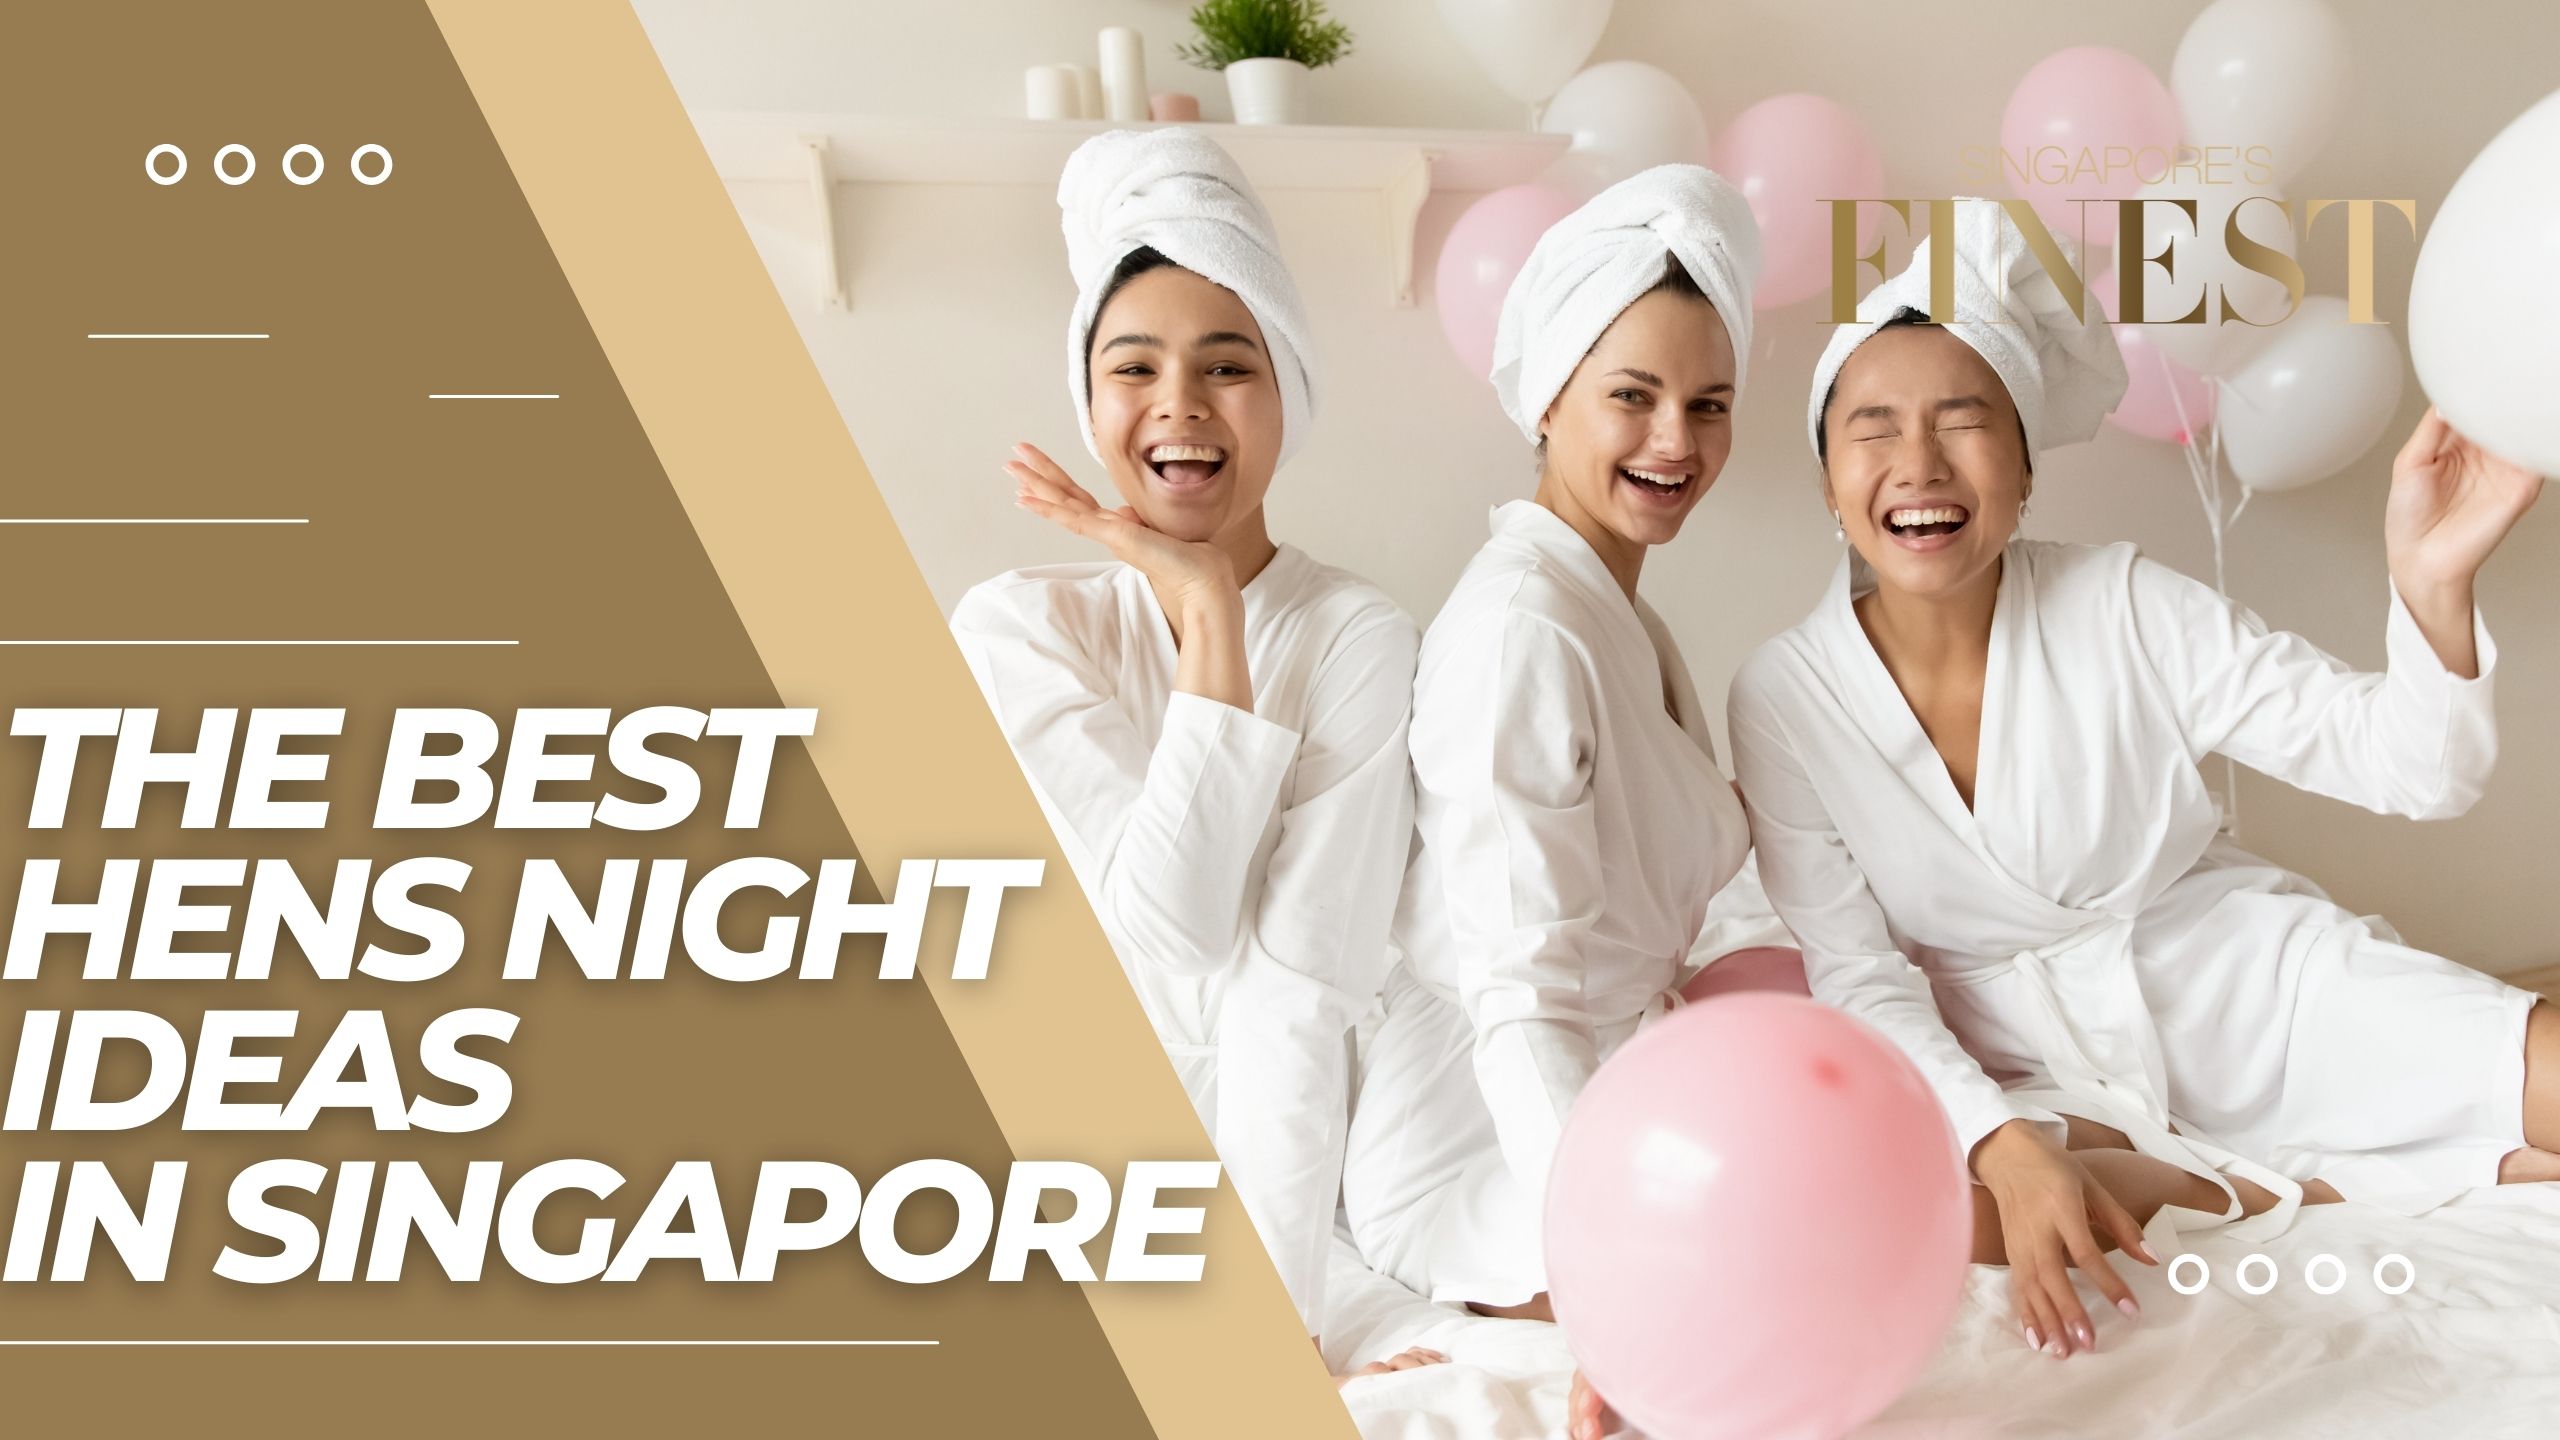 The Finest Hens Night Ideas in Singapore